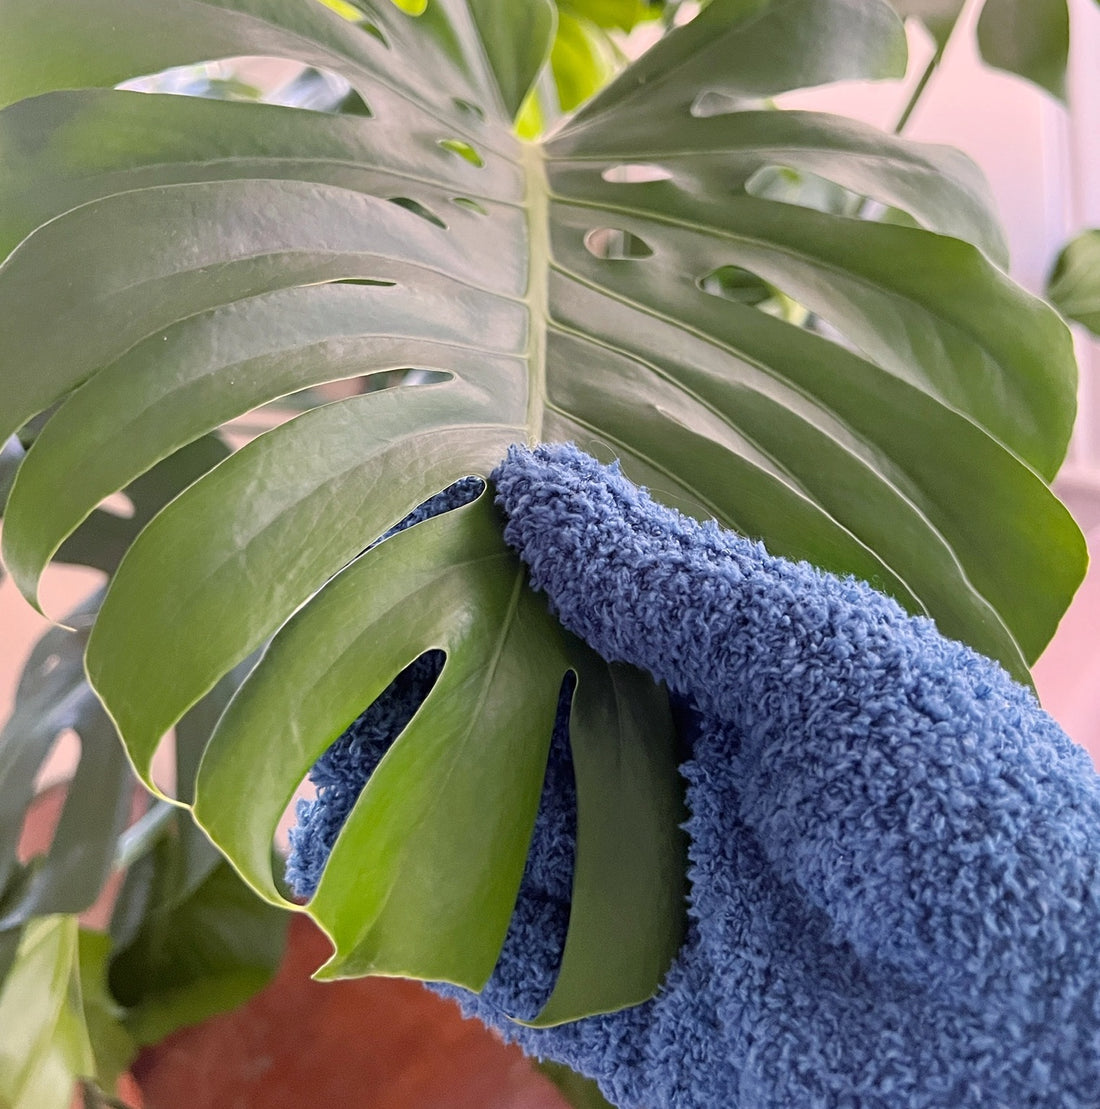 Unbiased plant tool review: Plant dusting gloves